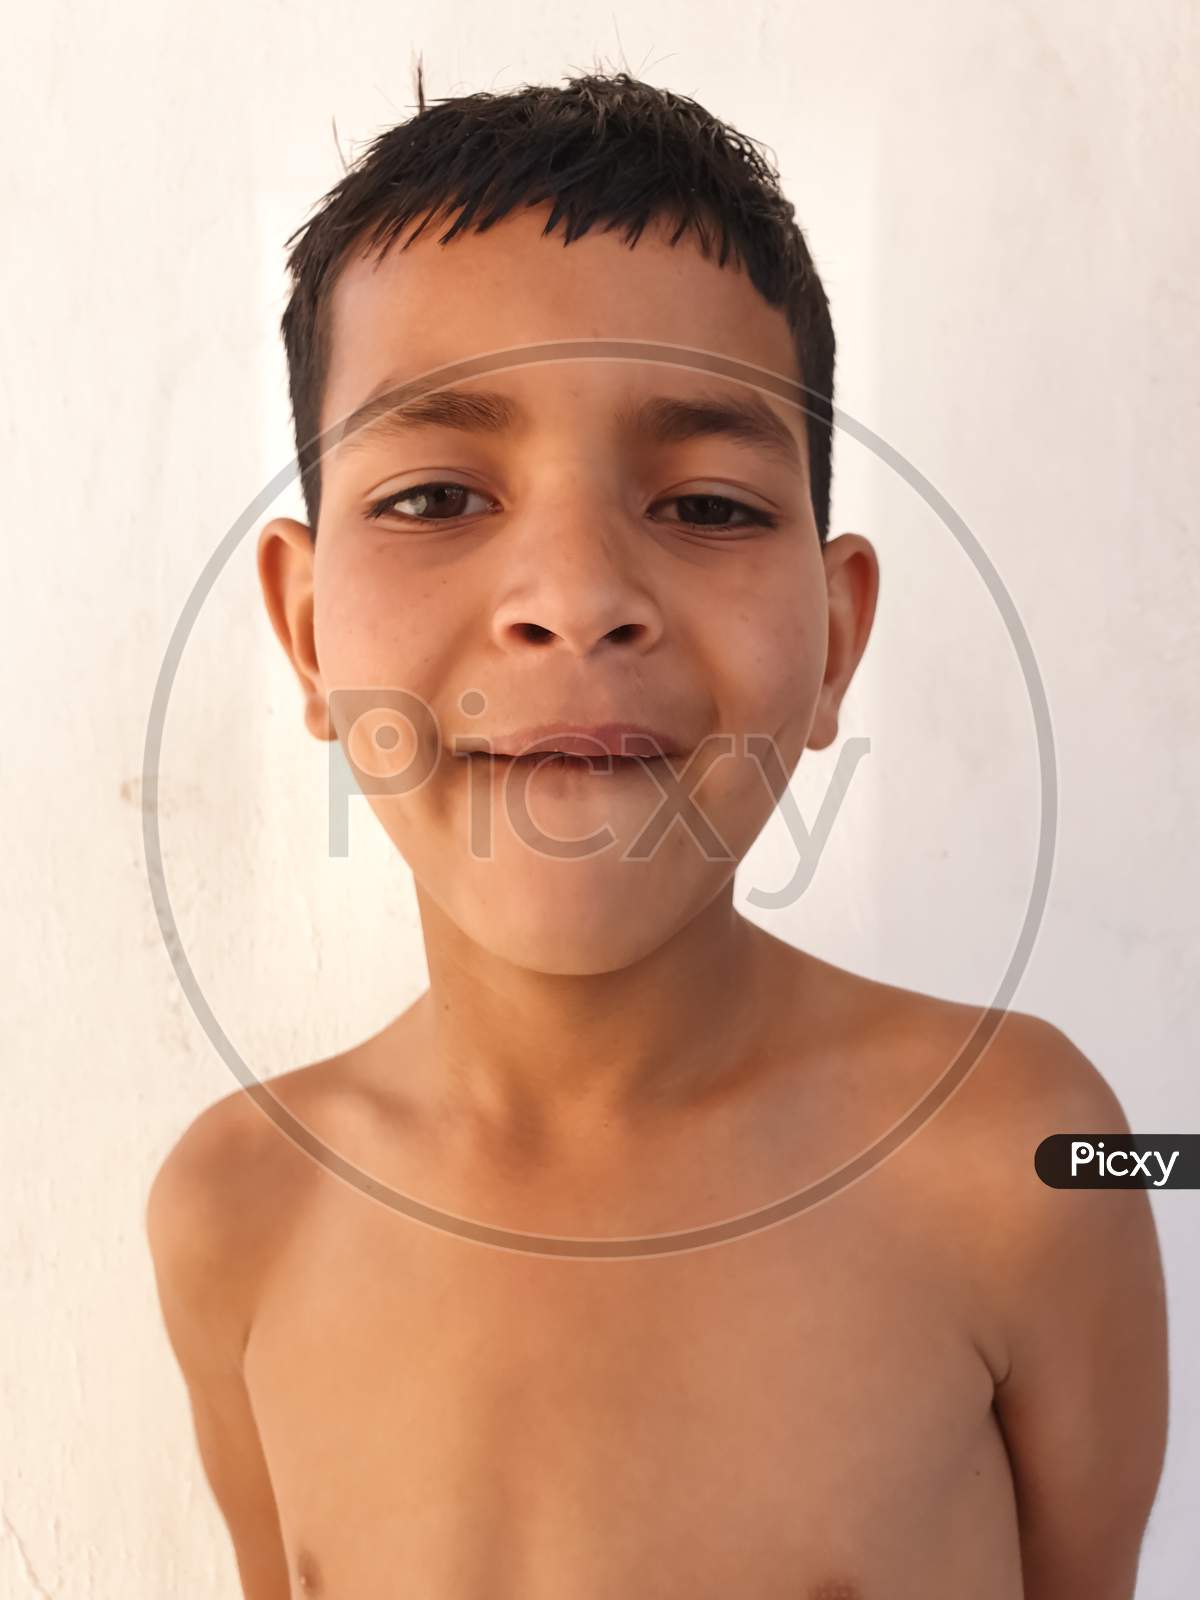 Closeup of a shirtless small boy with funny reaction, A south asian kid looking at camera